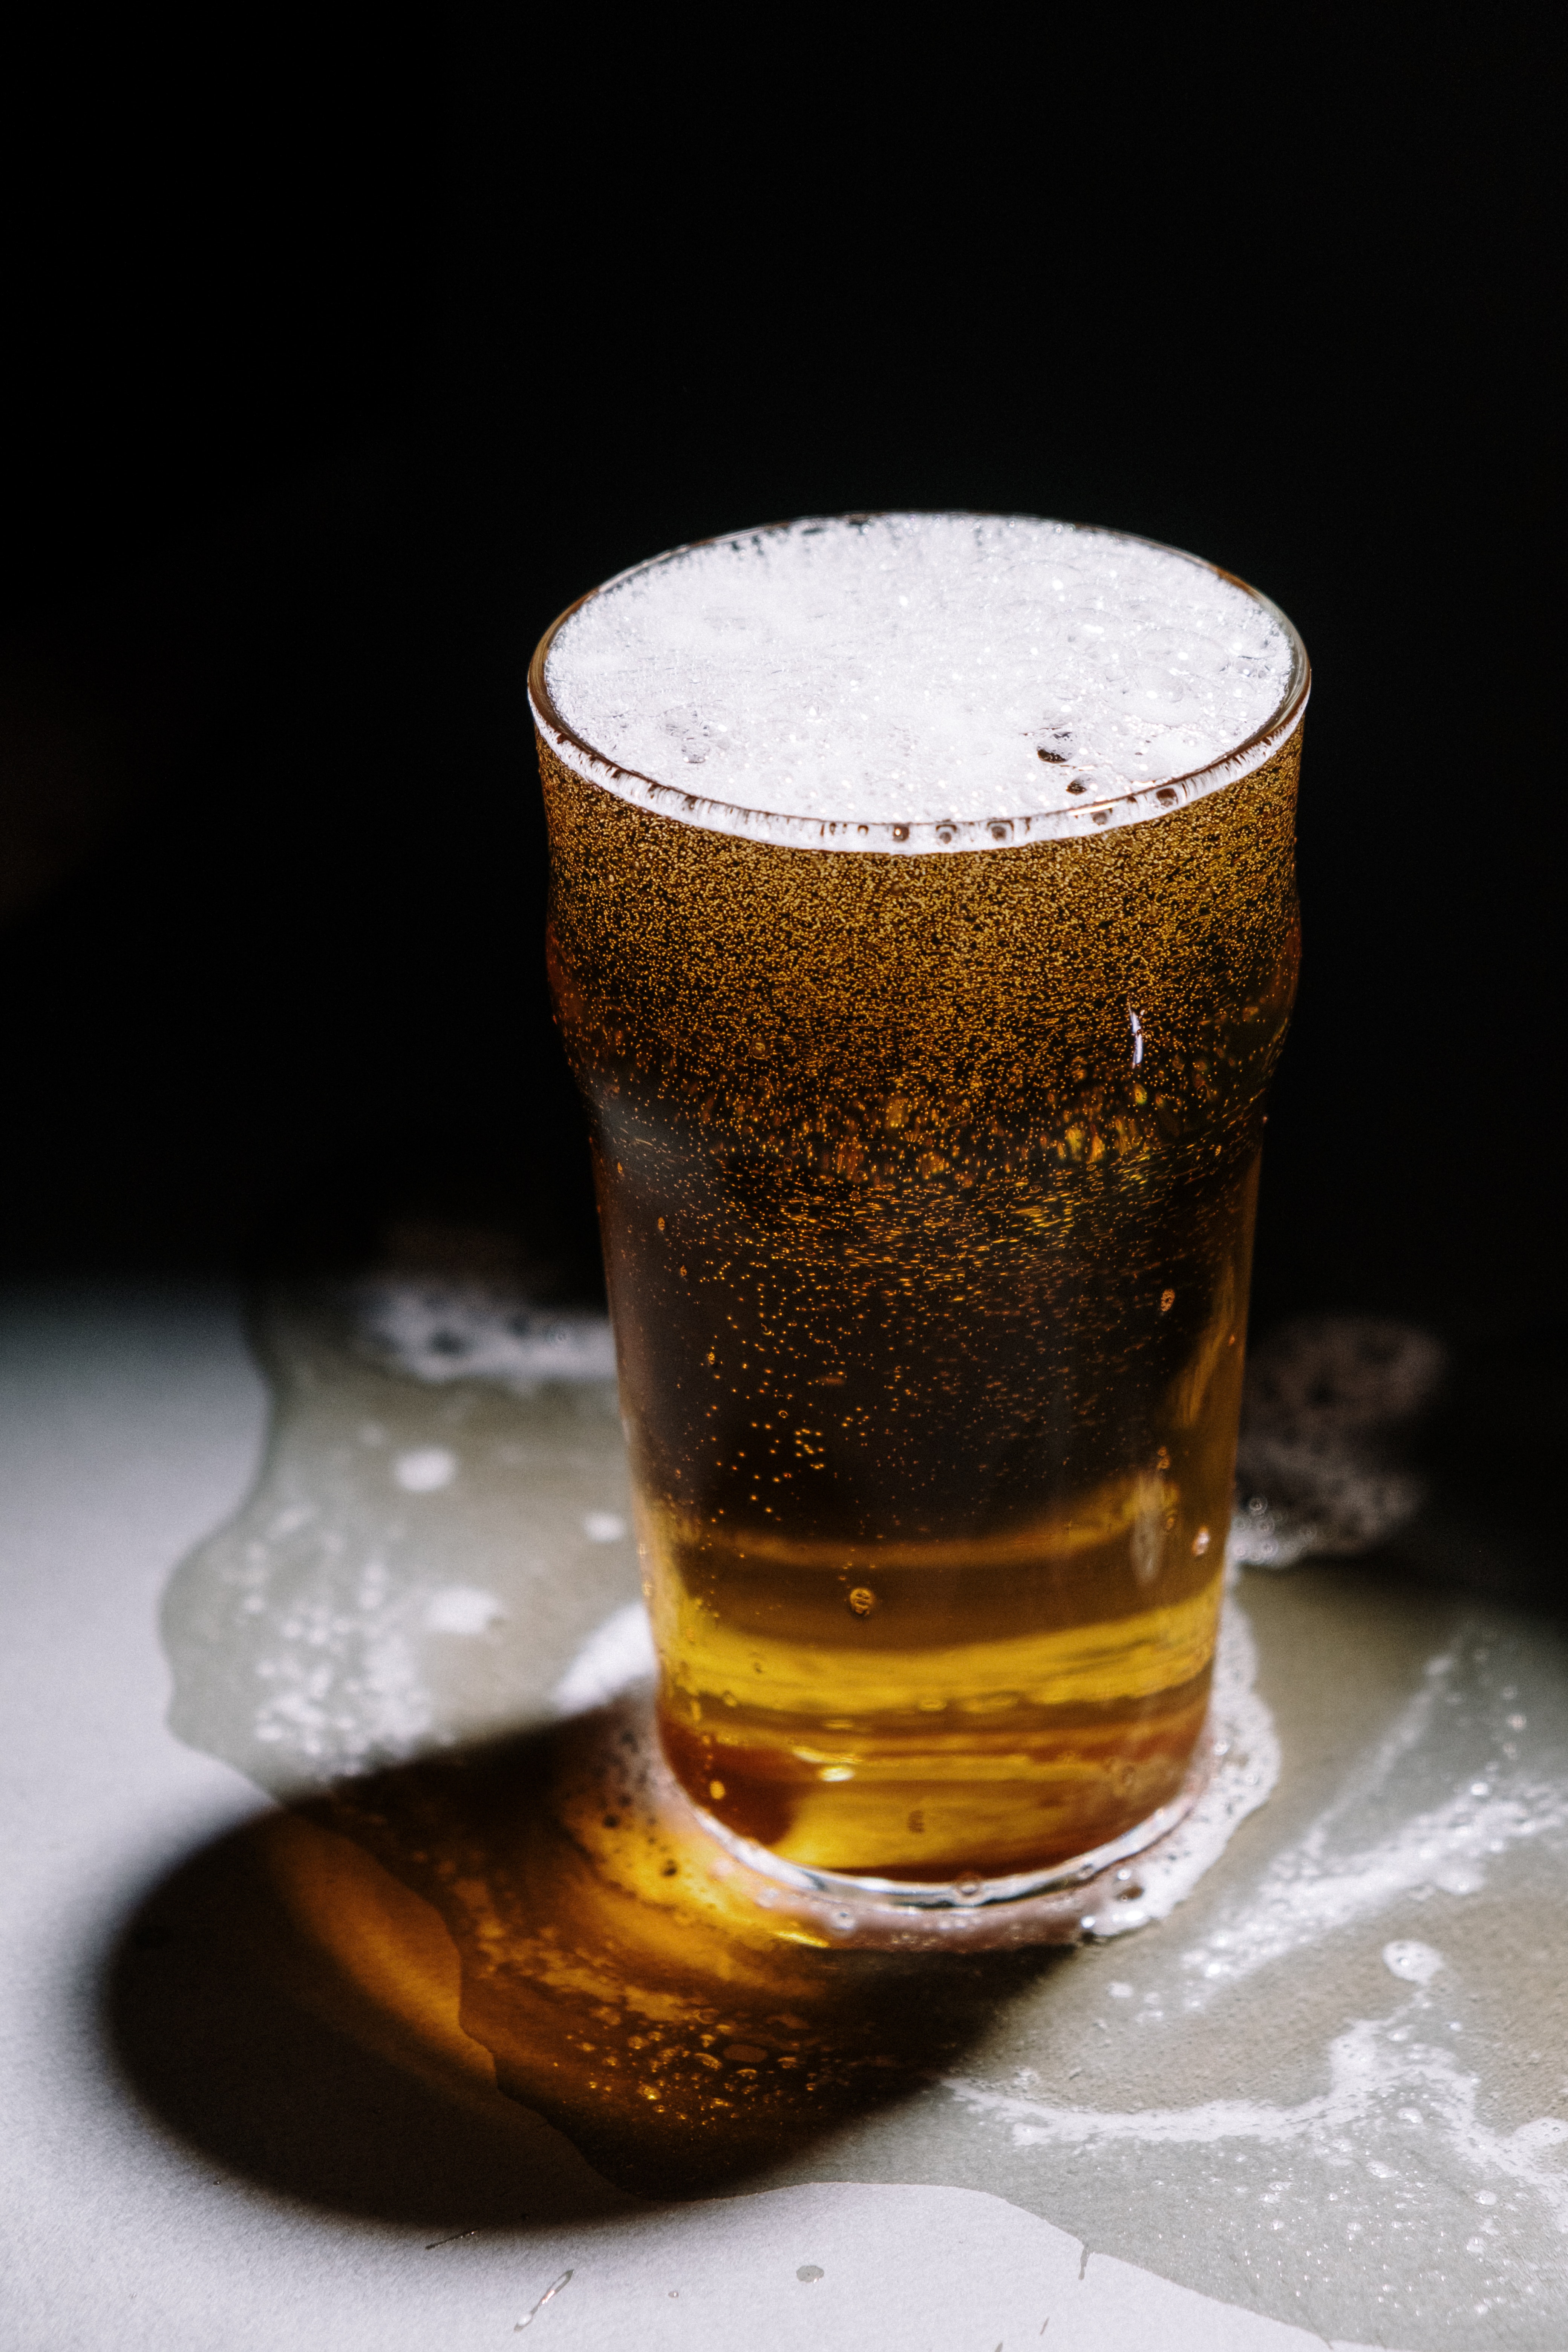 A pint glass of beer with overflowing foam on a table, creating a spill, indicative of potential overconsumption, relevant to discussions on the legal implications of a first offense DUI in Arizona.